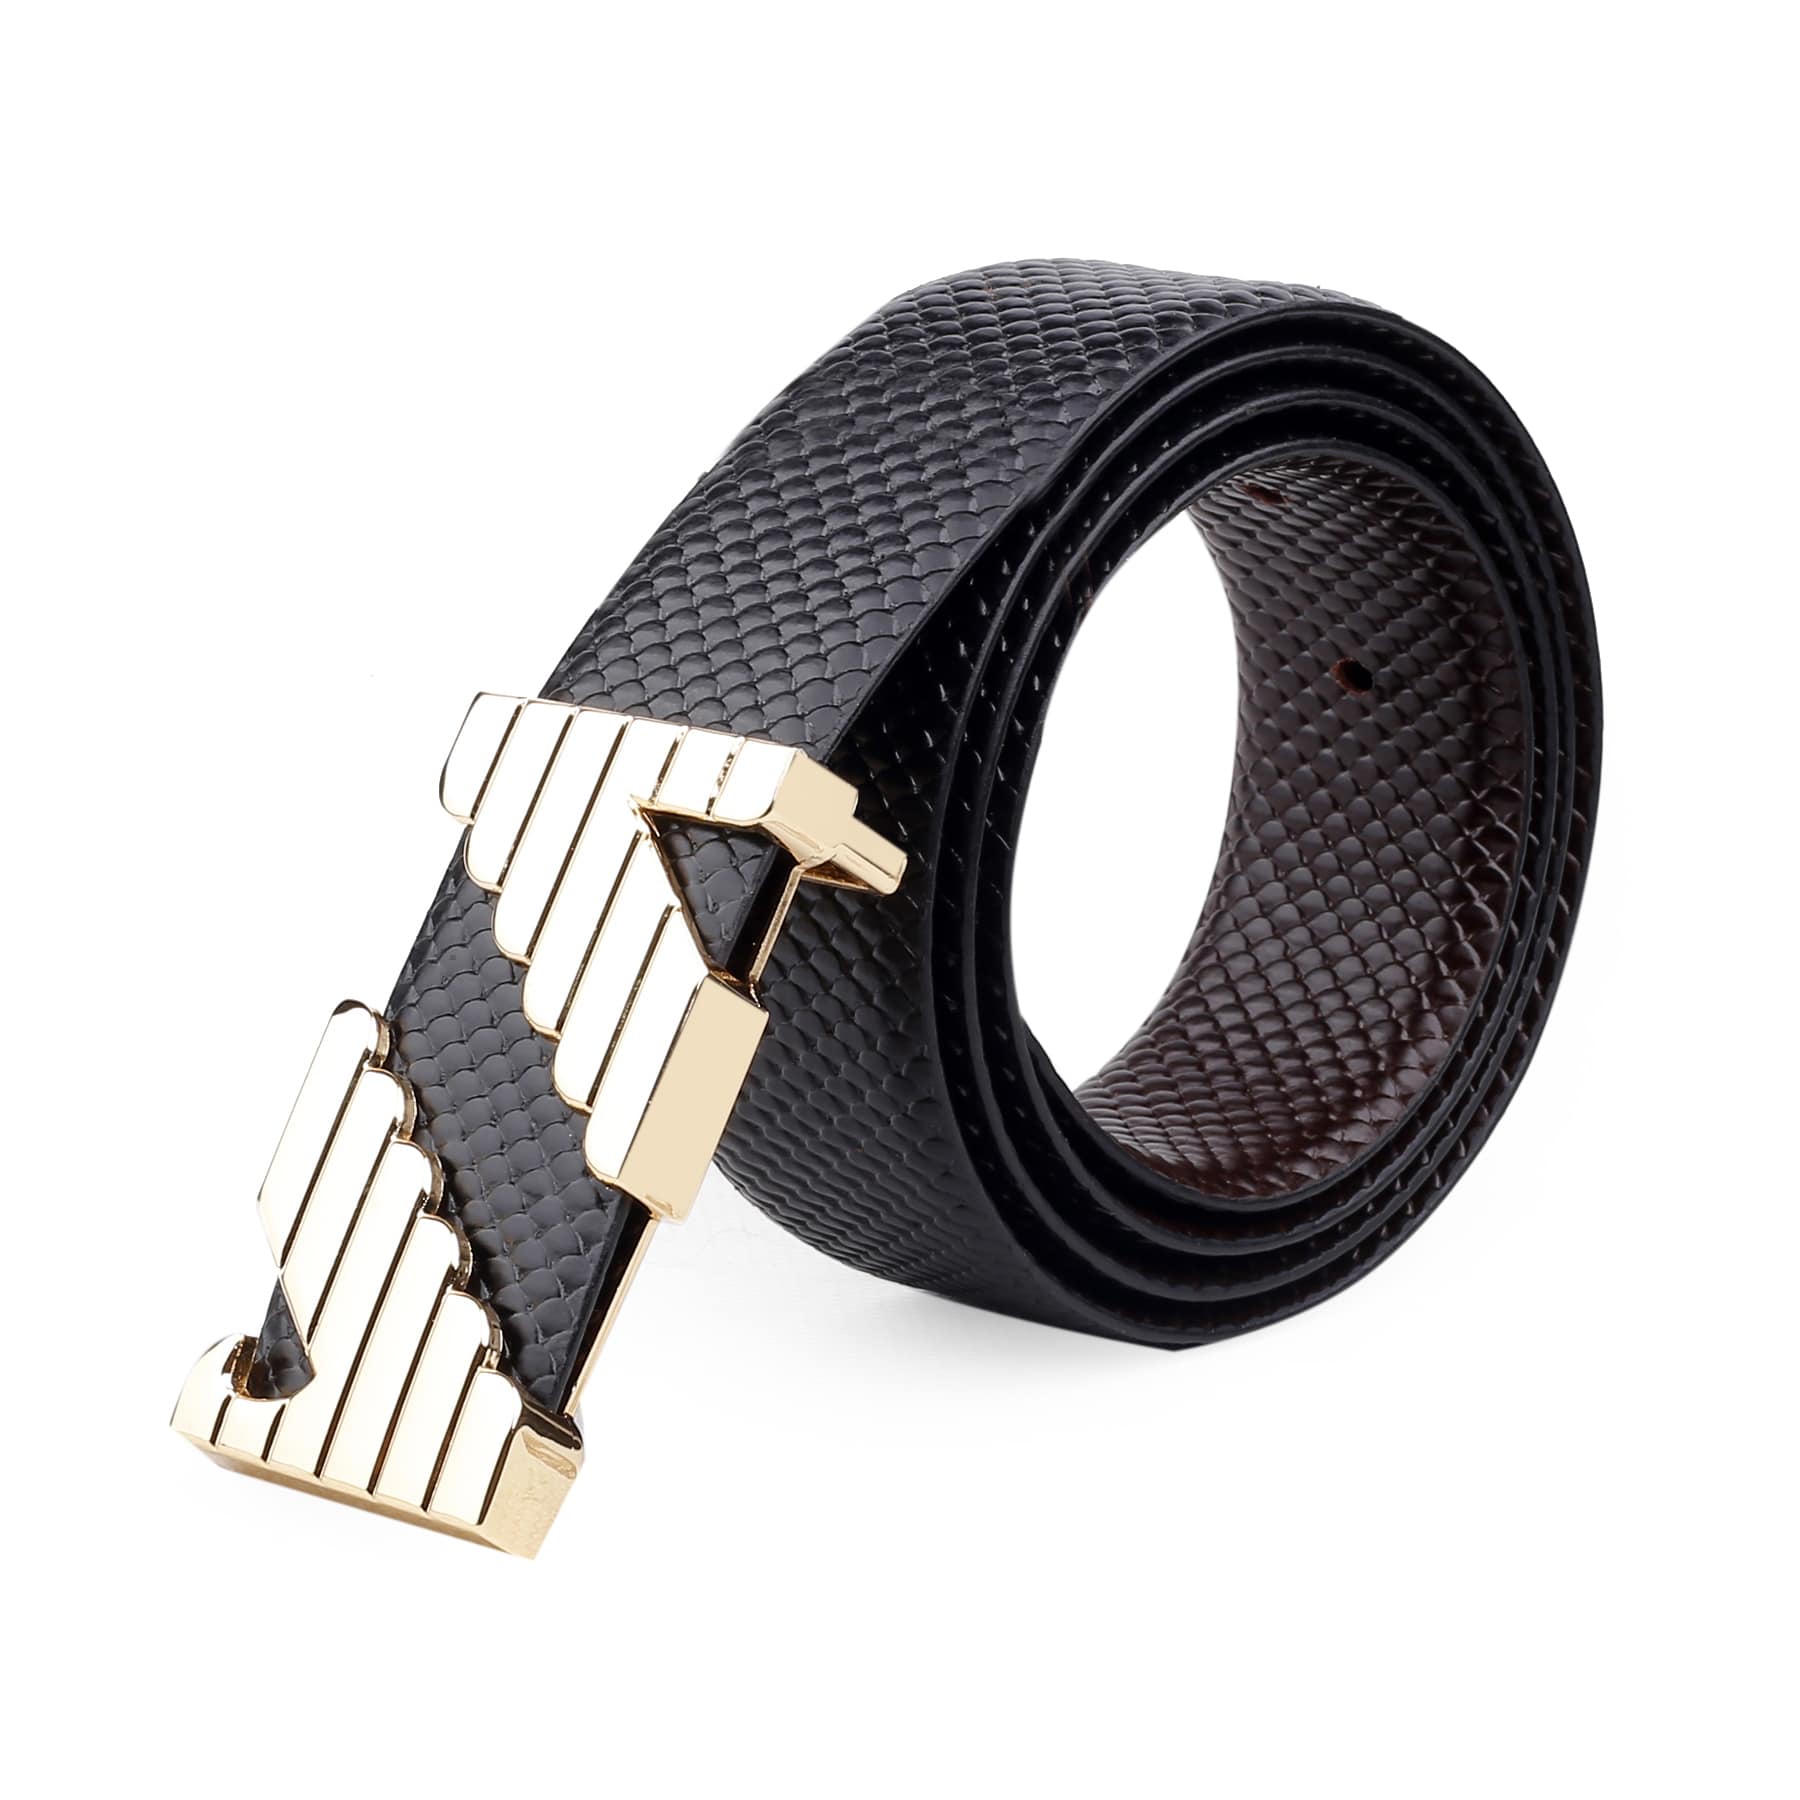 Bacca Bucci Premium Leather Formal Dress Belts with a Stylish Finish and Nickel-Free Buckle